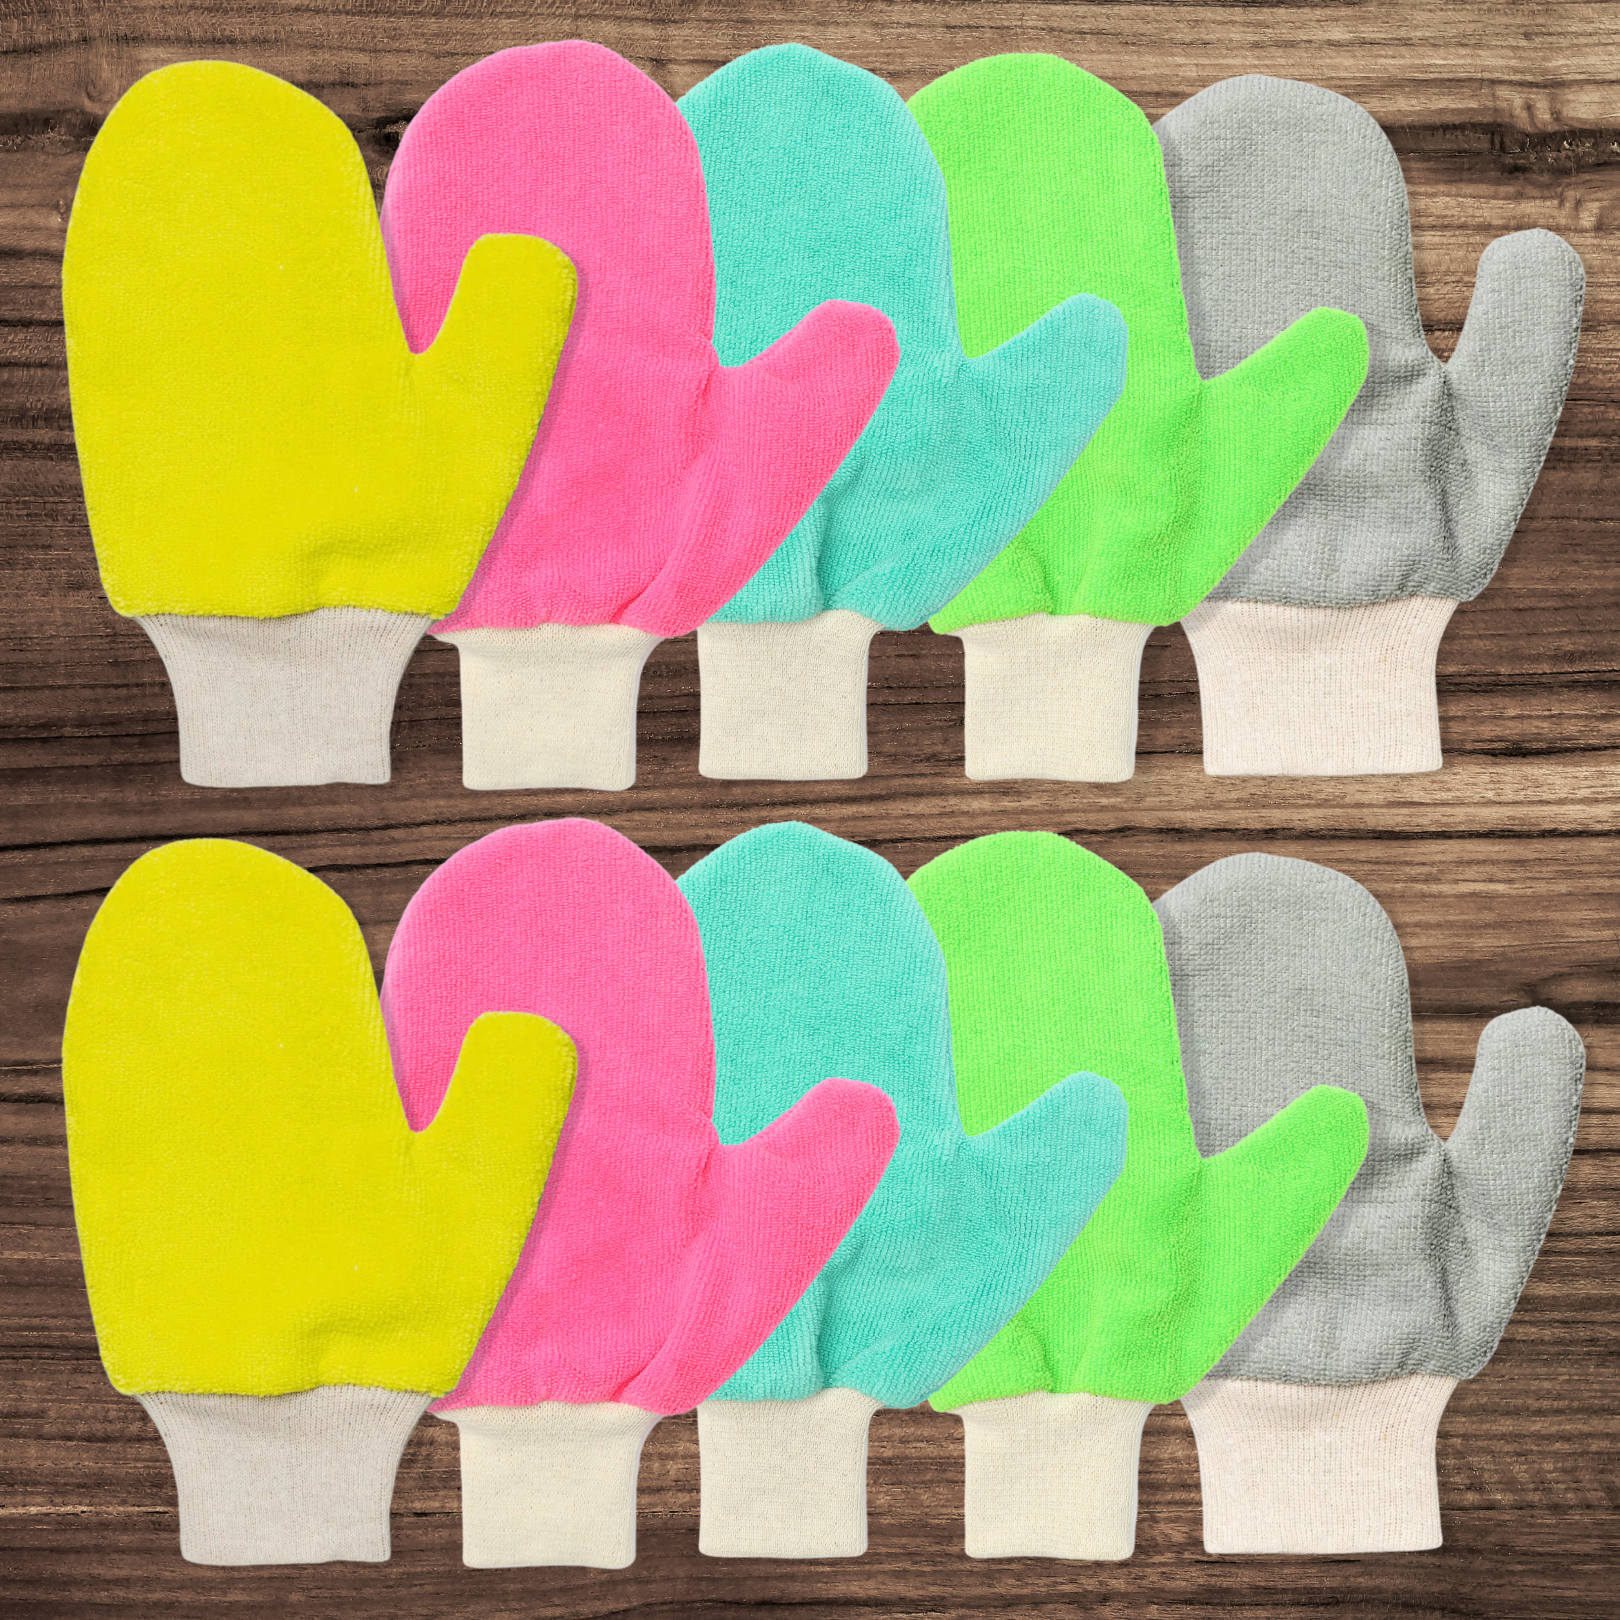 A yellow and a grey oven mitt on wooden background.